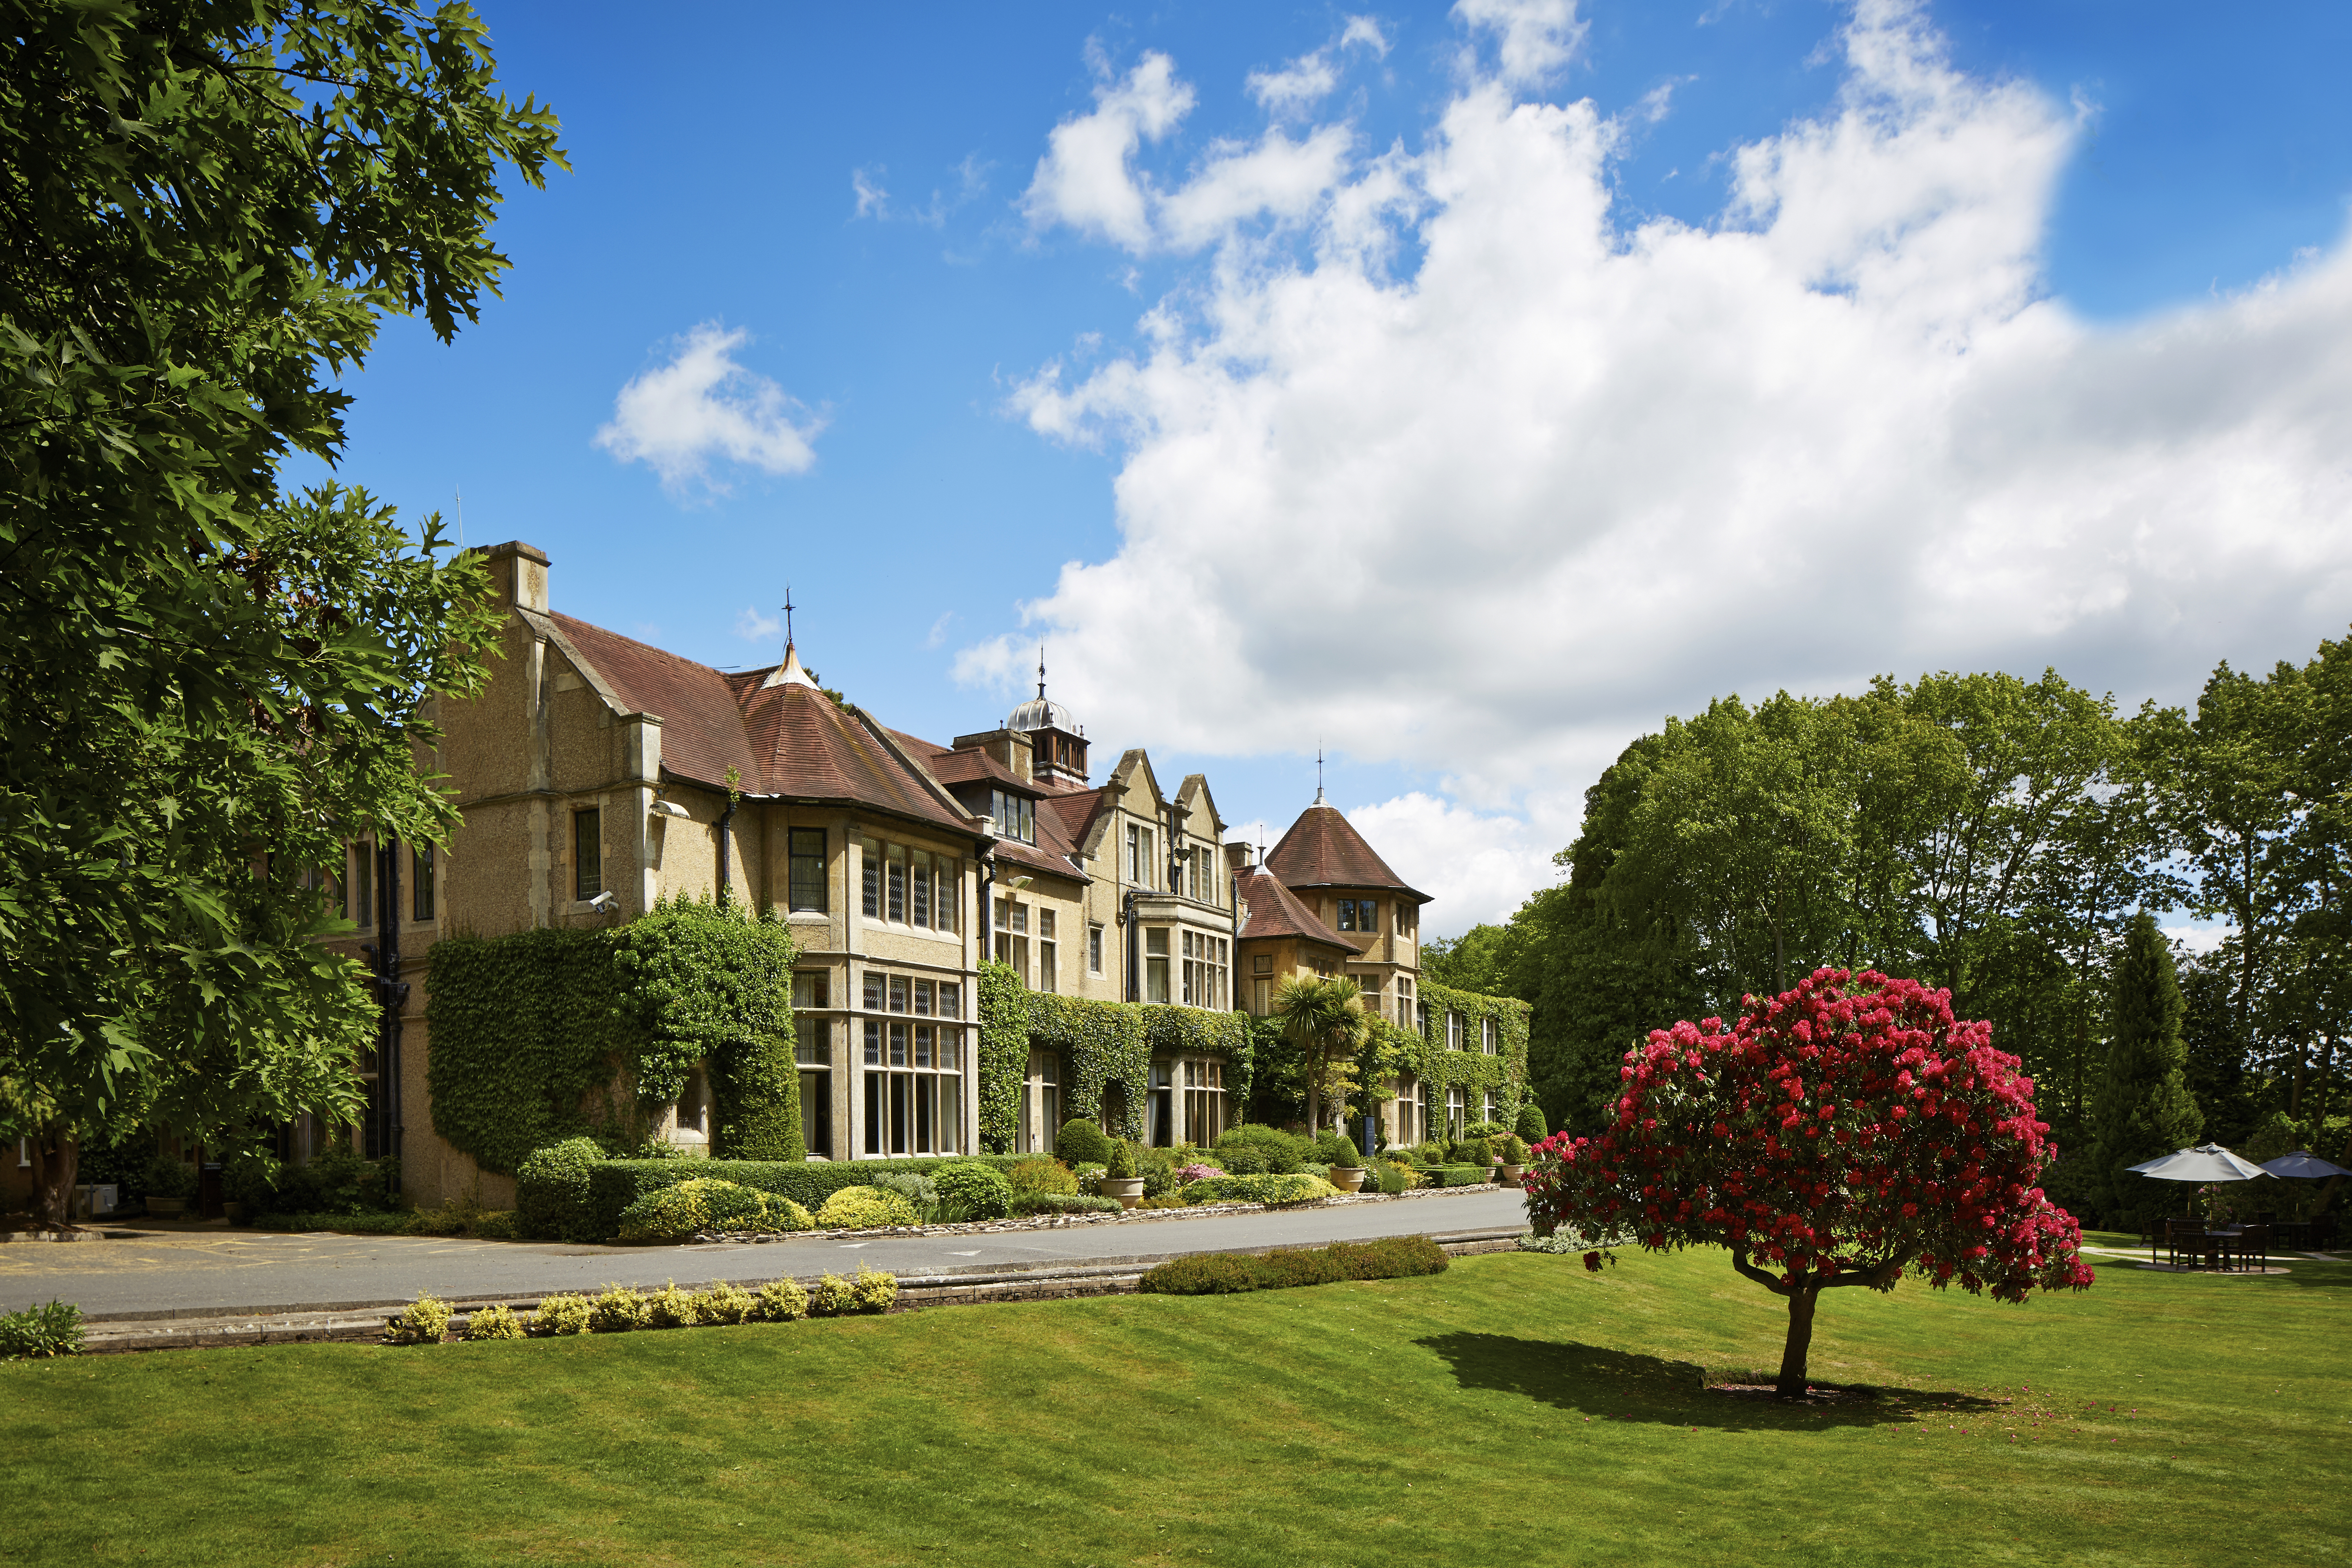 1 Night The Essential Spa Break For Two, Macdonald Frimley Hall Hotel